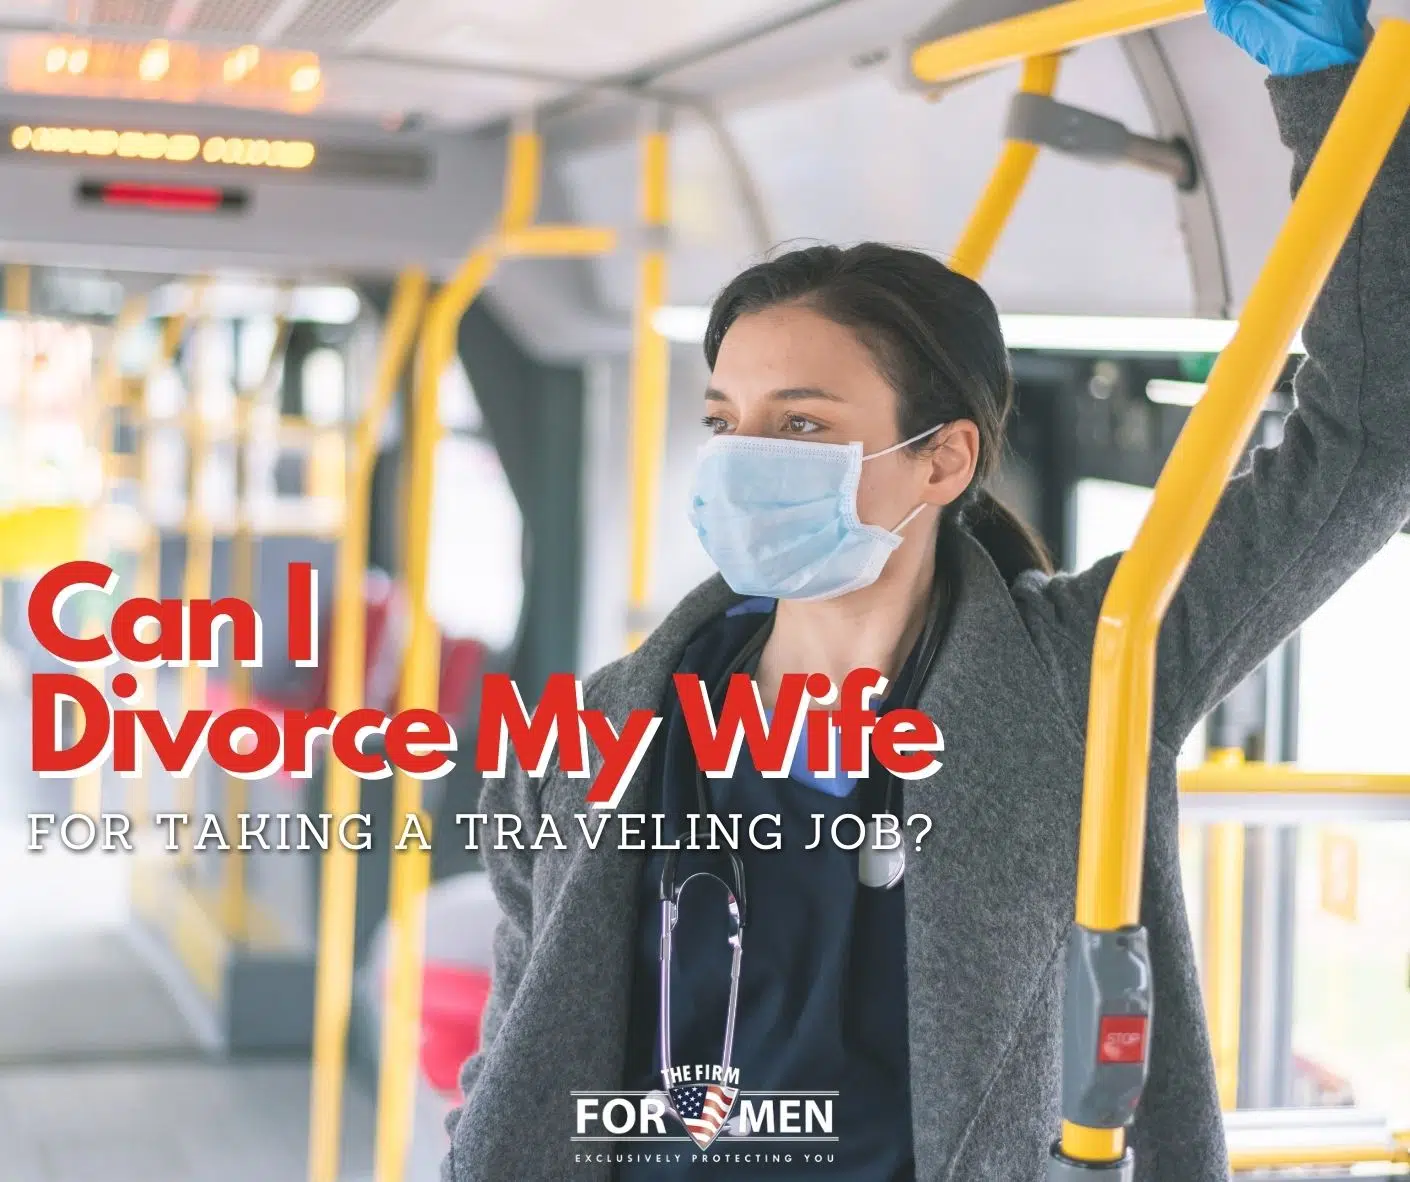 Divorce My Wife for Taking a Traveling Job